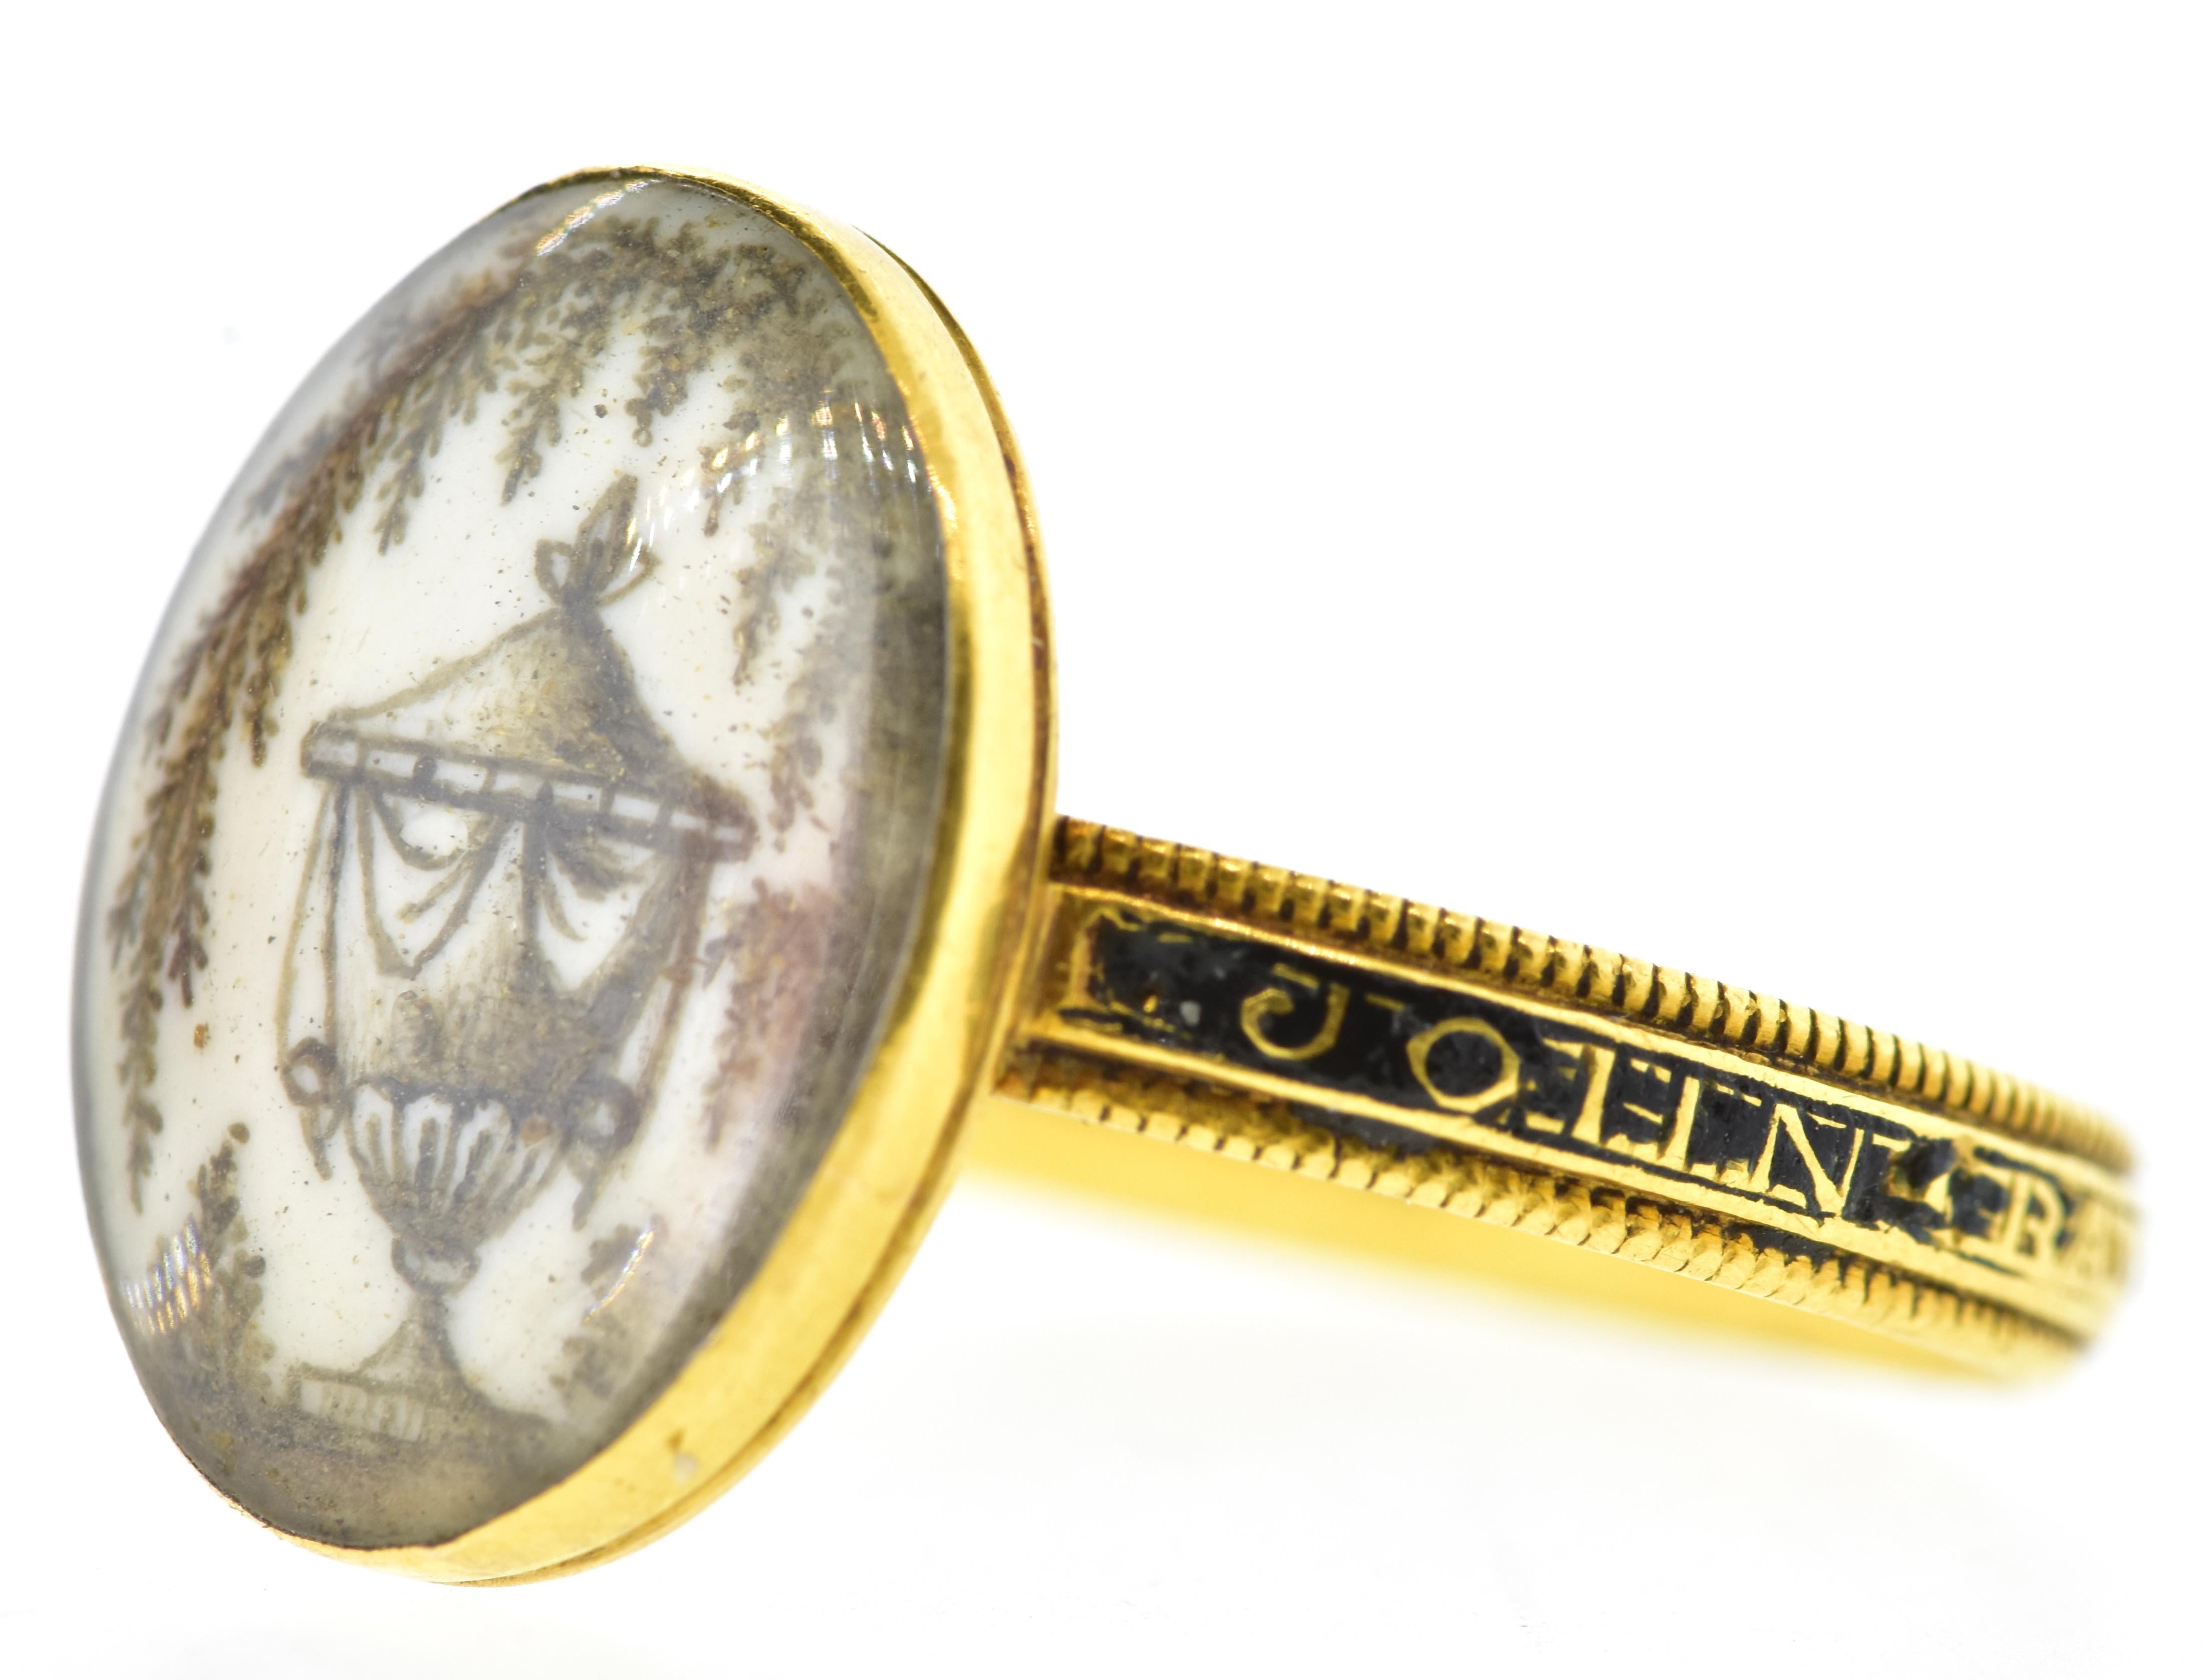 Georgian memorial ring.  This is an historically important American 18K gold enameled and miniature painted (under rock crystal) mourning ring of a vessel commemorating 